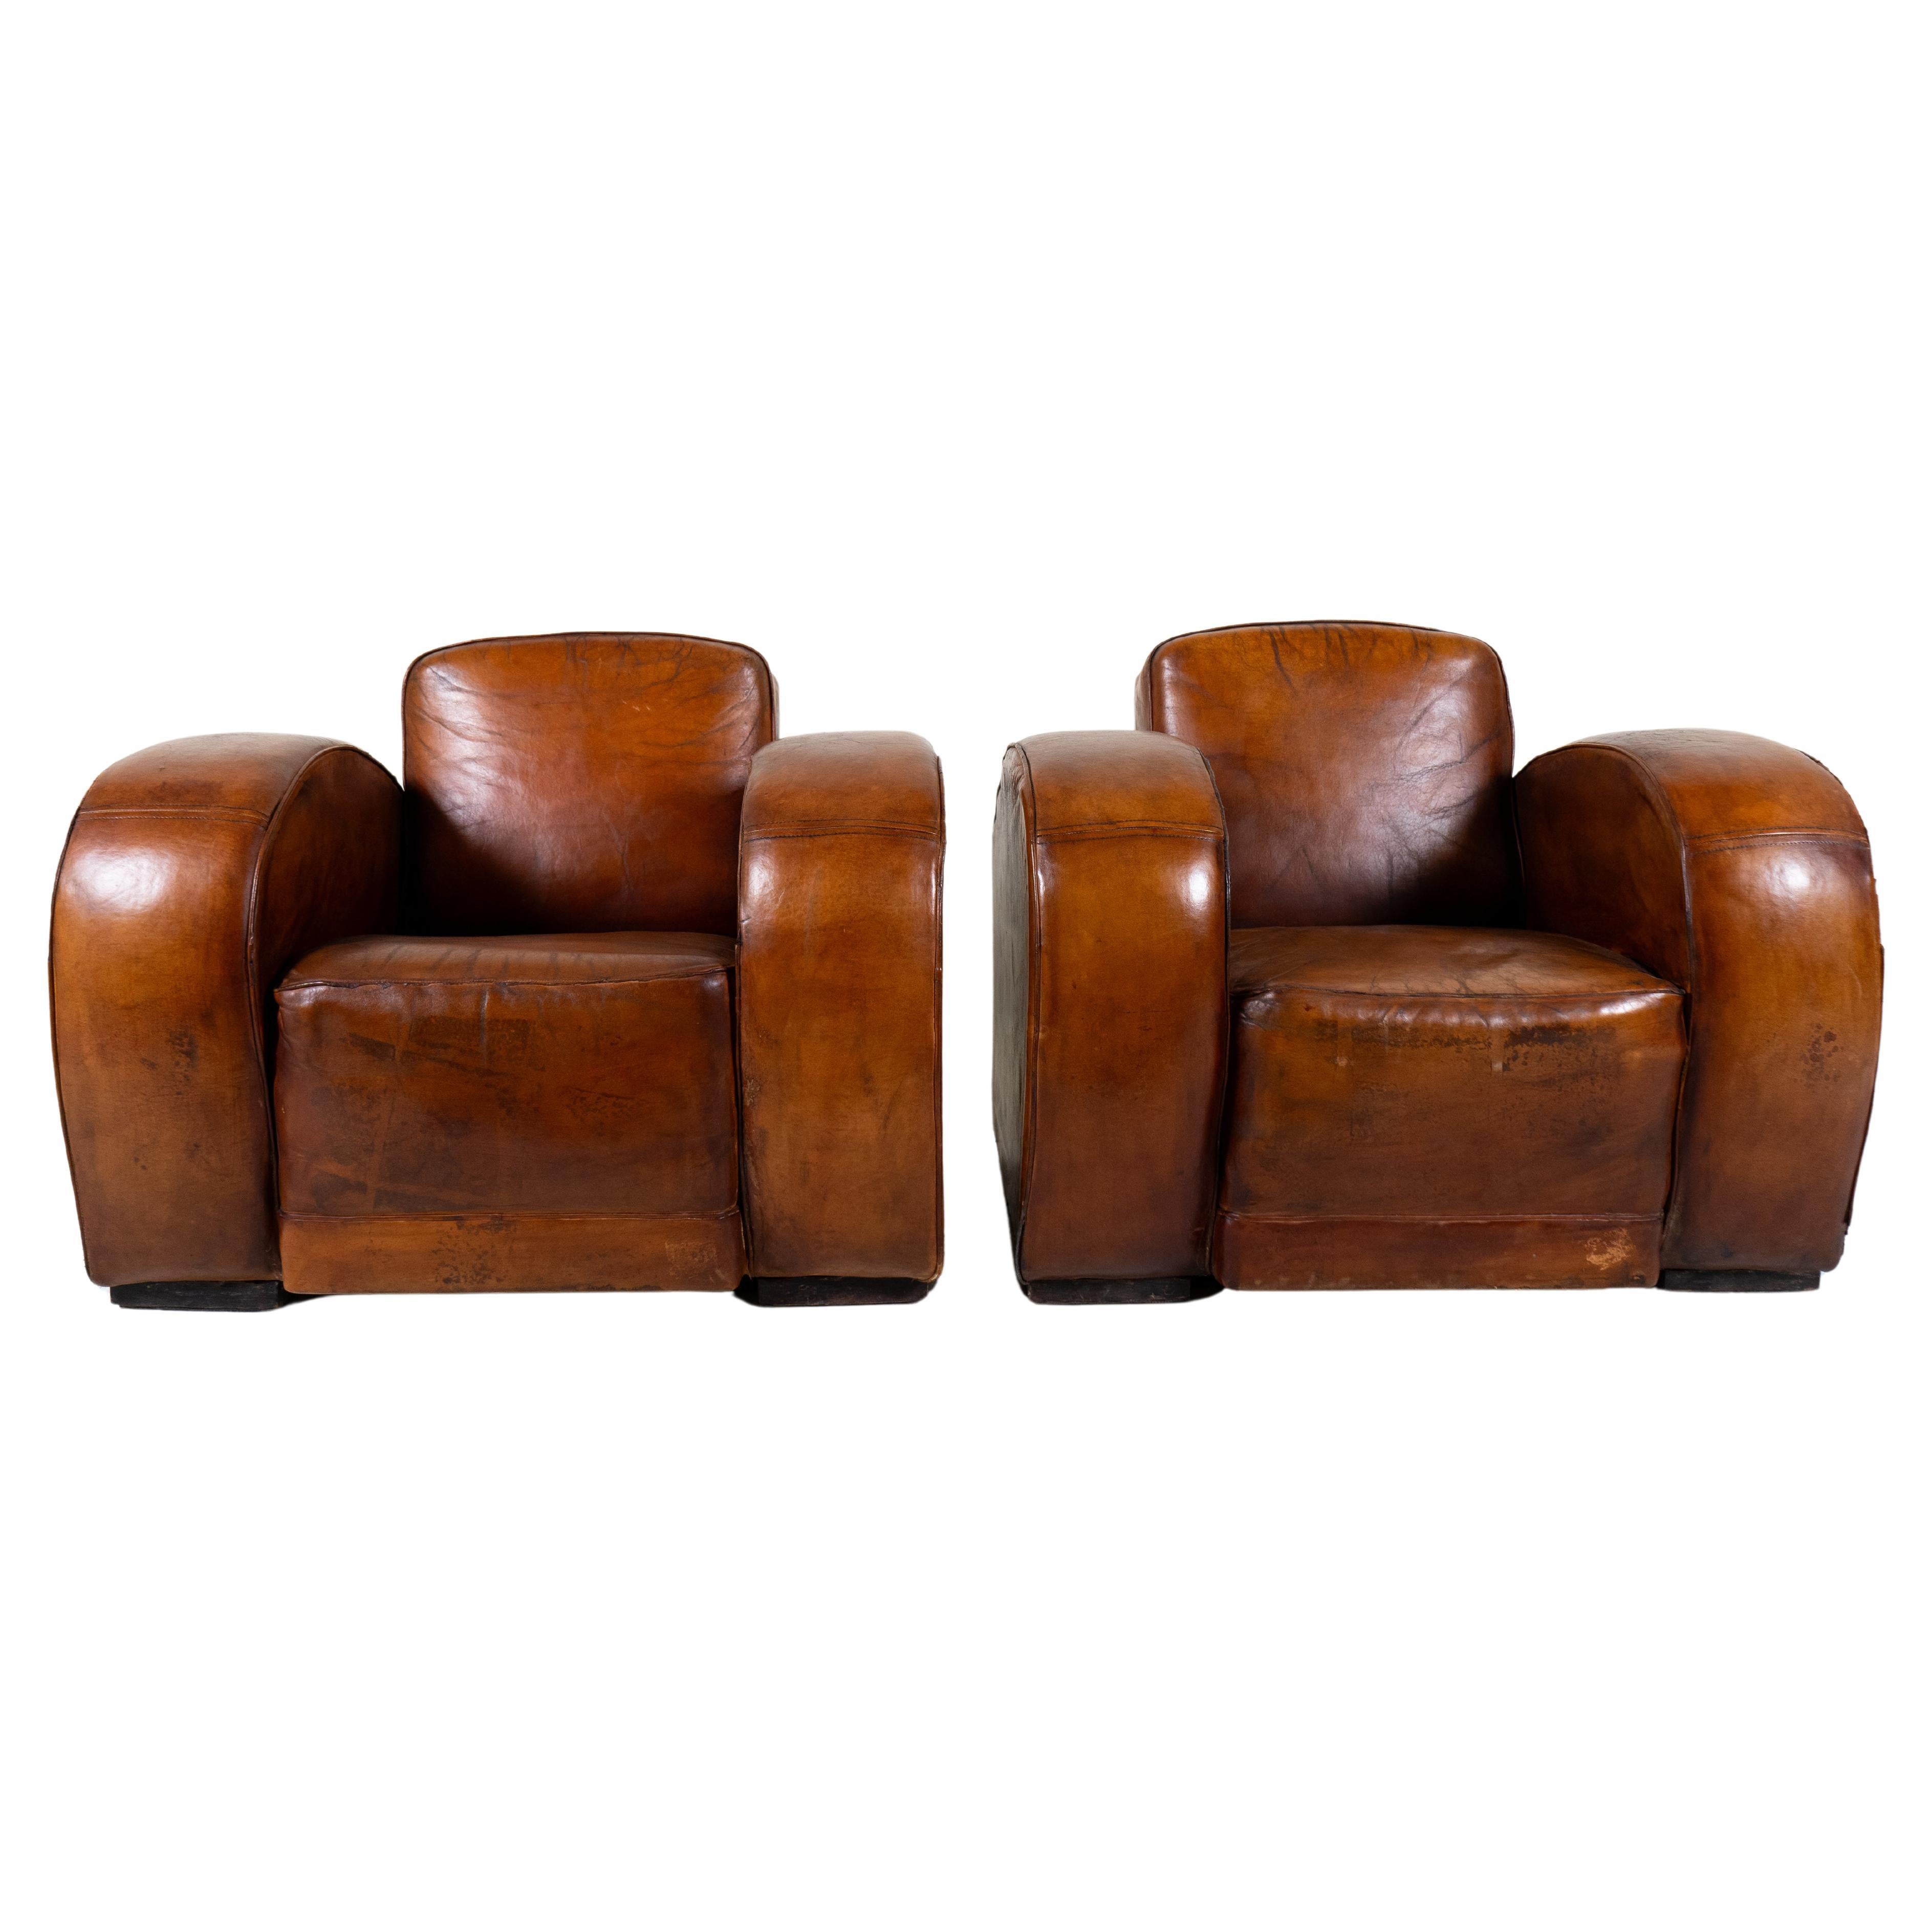 A Pair of Art Deco Leather Club Chairs, France c.1930 For Sale